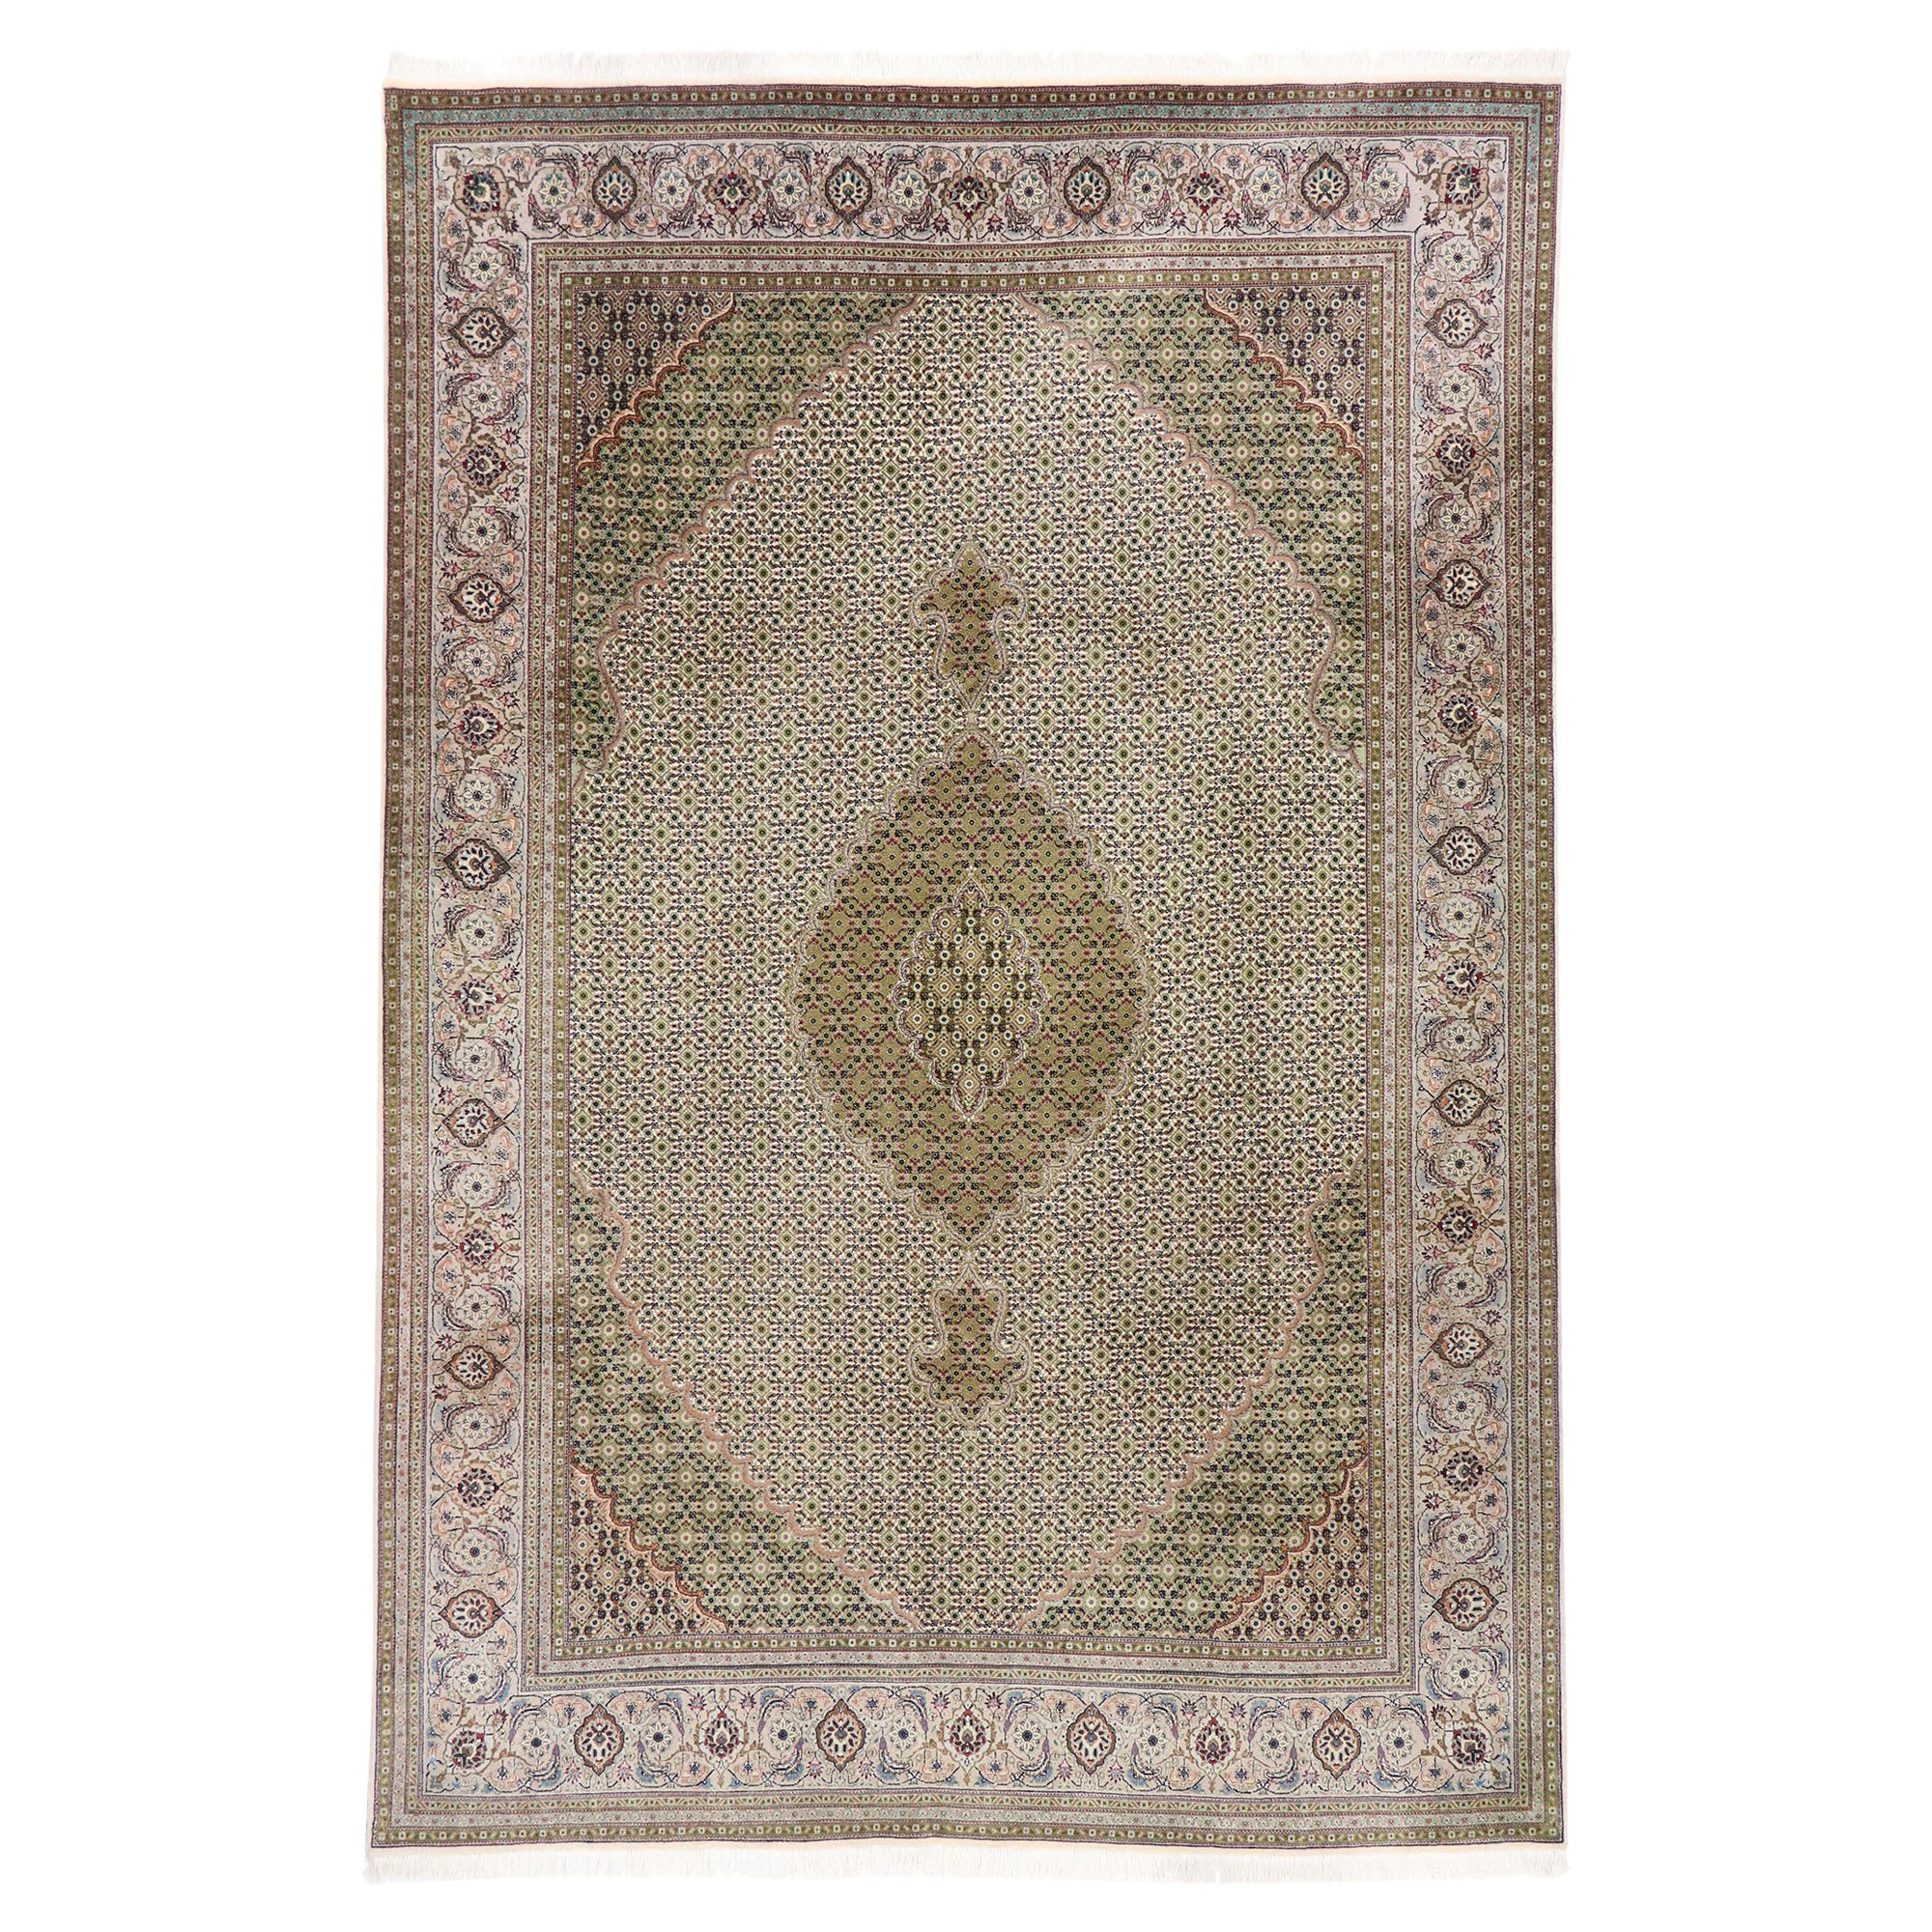 Vintage Persian Mahi Tabriz Rug with Neoclassical Victorian Style For Sale